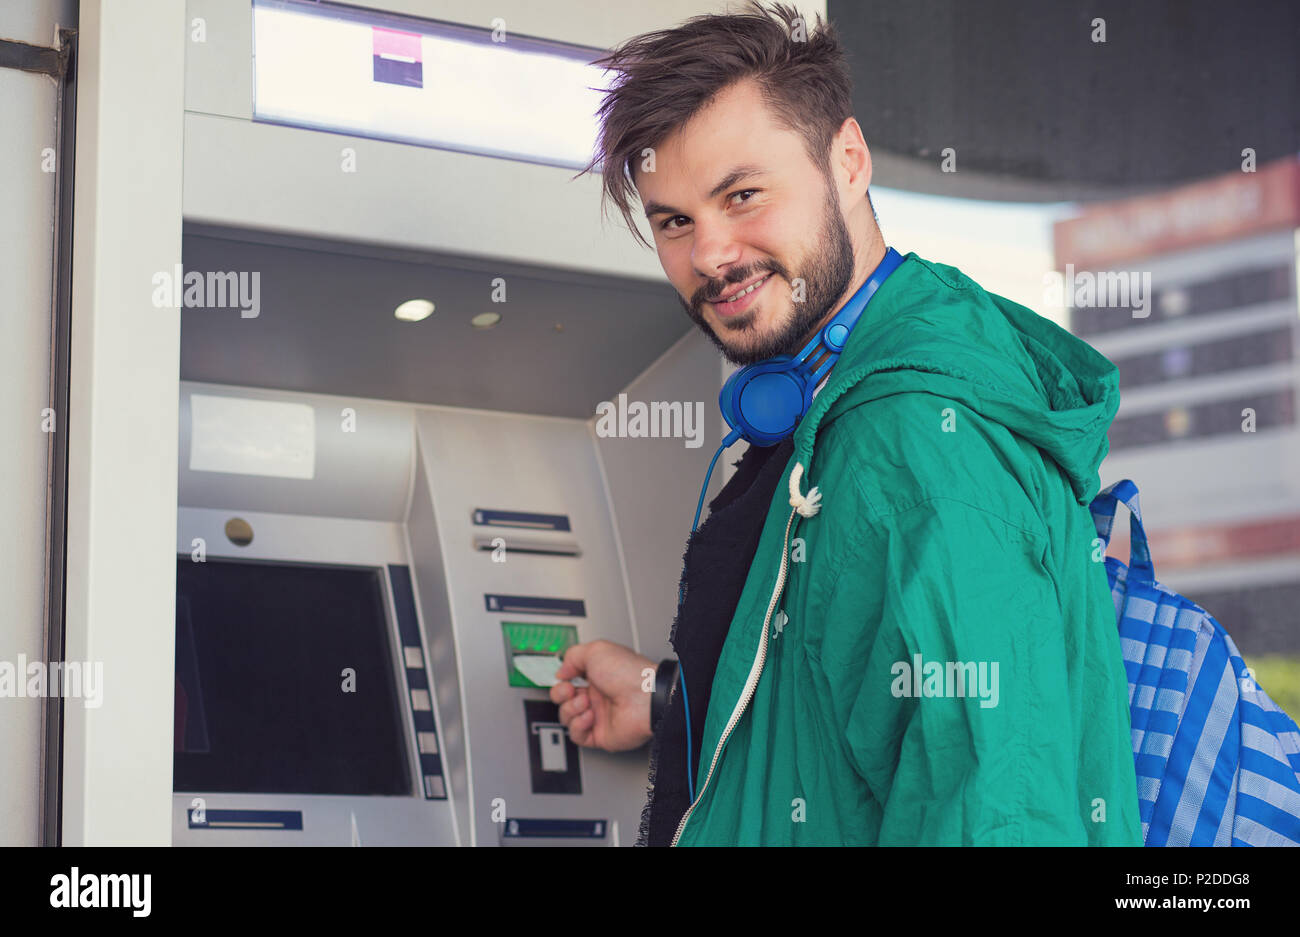 Young hipster guy in headphones smiling at camera while inserting credit card in ATM machine getting cash money Stock Photo